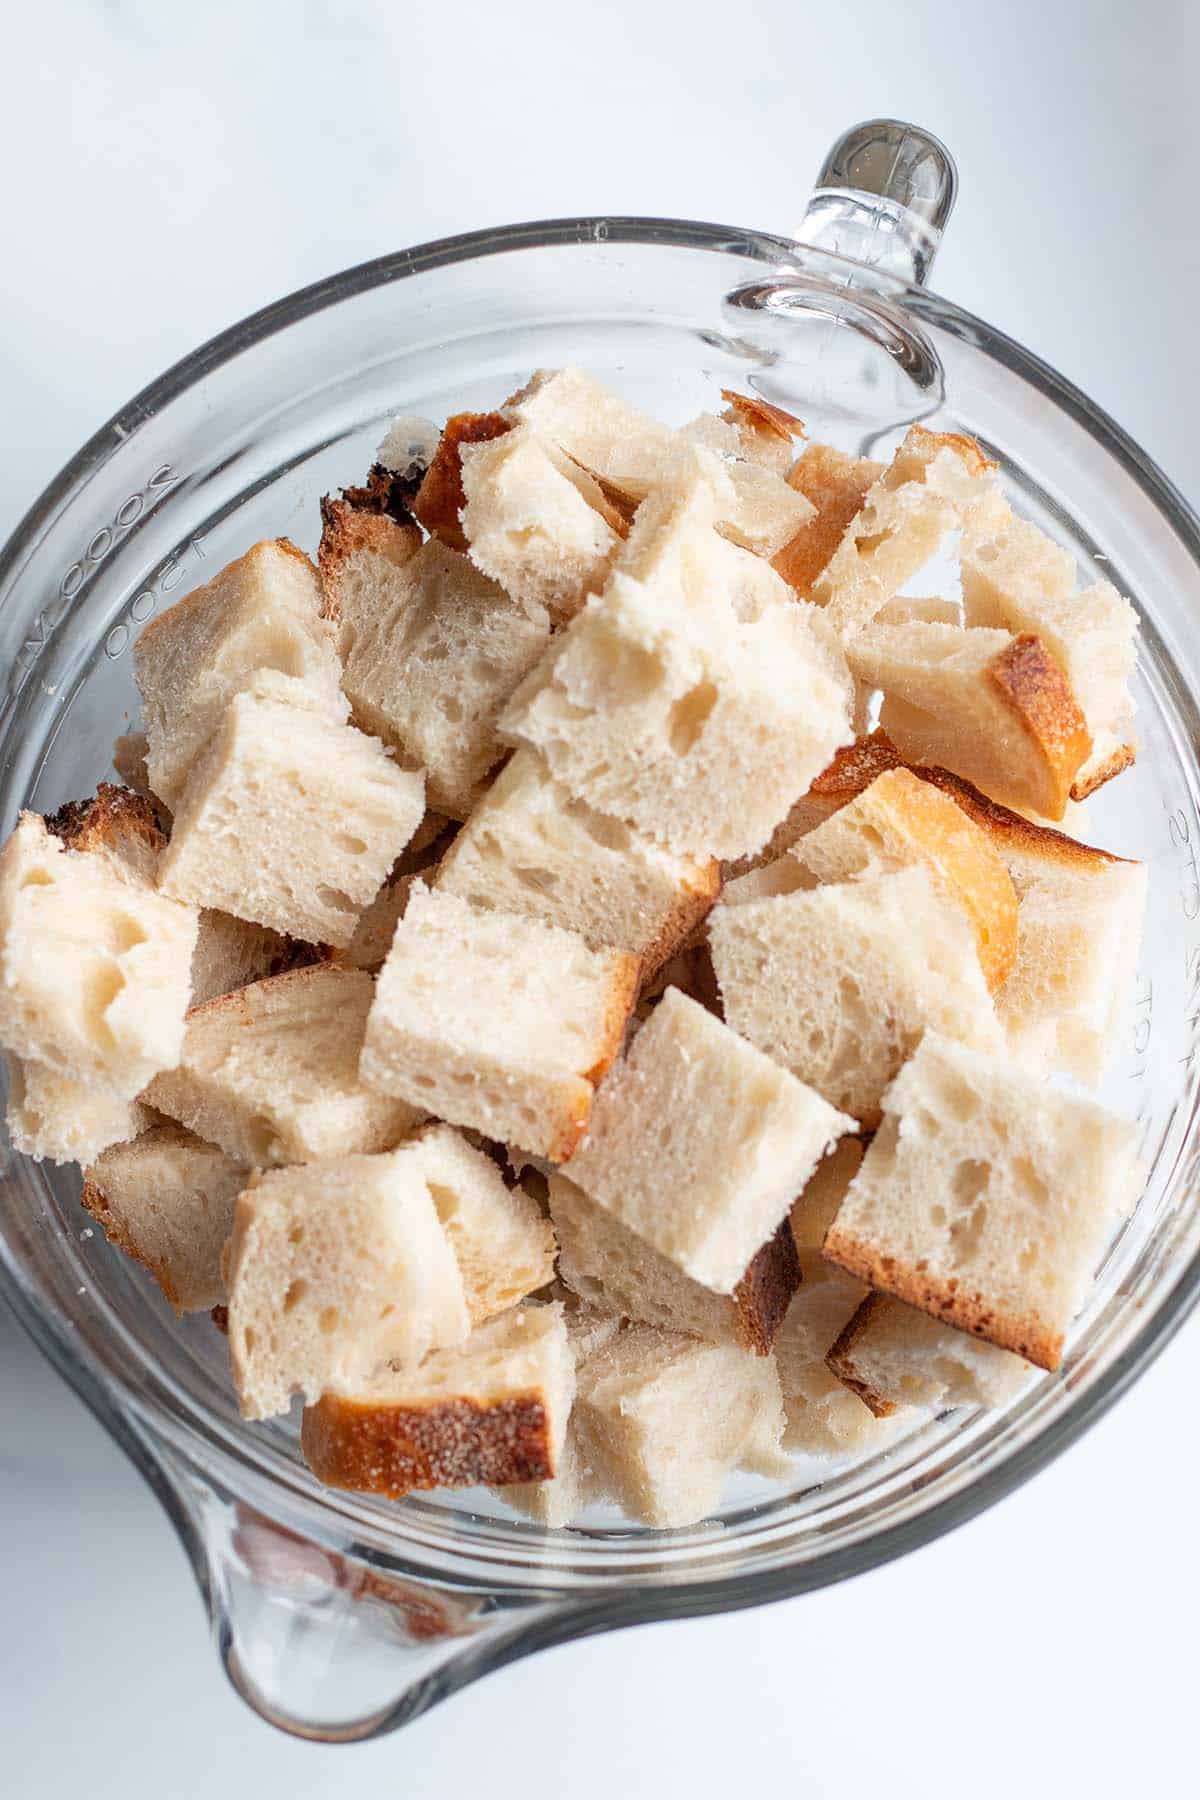 A glass measuring bowl with chunks of sourdough bread.